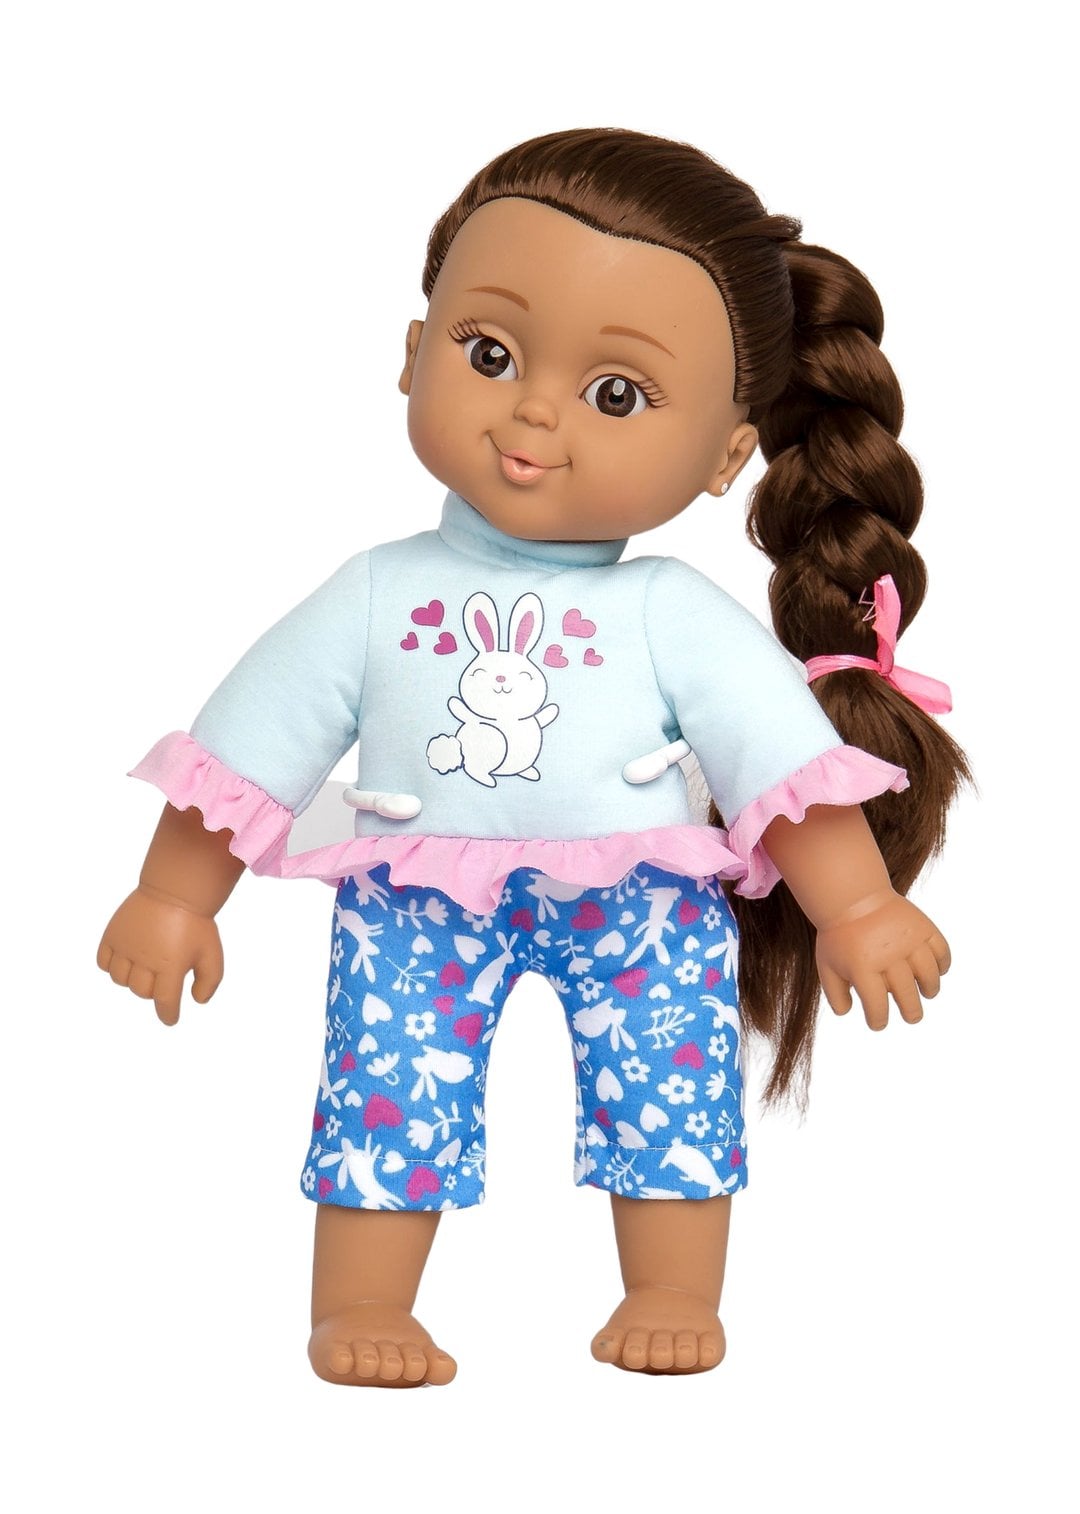 doll toys for toddlers